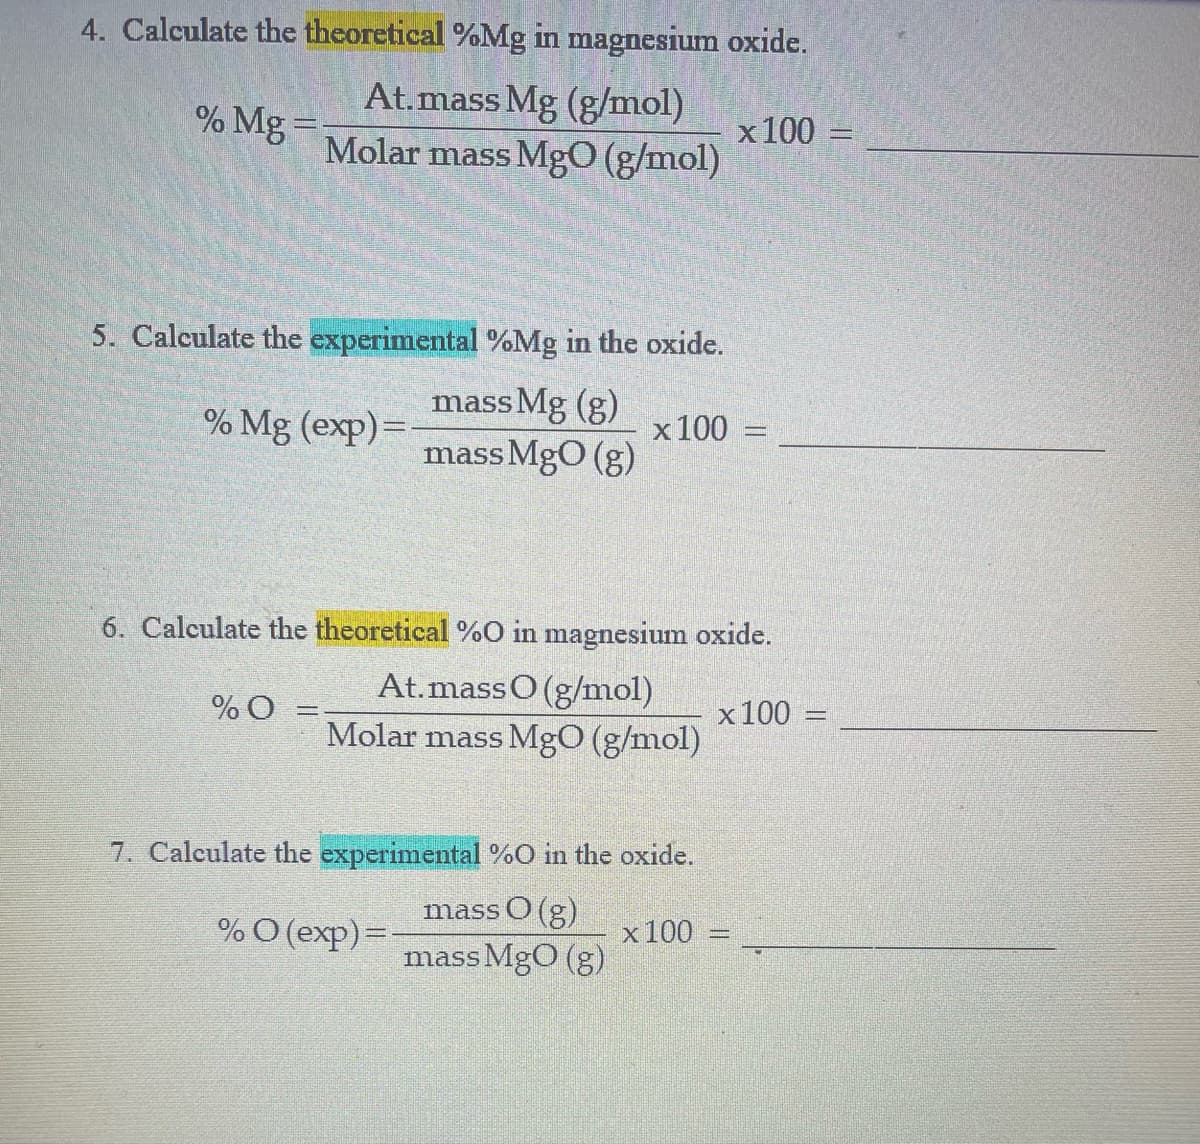 4. Calculate the theoretical %Mg in magnesium oxide.
At.mass Mg (g/mol)
x100
Molar mass MgO (g/mol)
% Mg =
5. Calculate the experimental %Mg in the oxide.
mass Mg (g)
x 100
mass MgO (g)
% Mg (exp)=
6. Calculate the theoretical %O in magnesium oxide.
At.massO (g/mol)
= 0%
Molar mass MgO (g/mol)
x100
7. Calculate the experimental %O in the oxide.
mass O (g)
%O (exp)=
x100
mass MgO (g)
